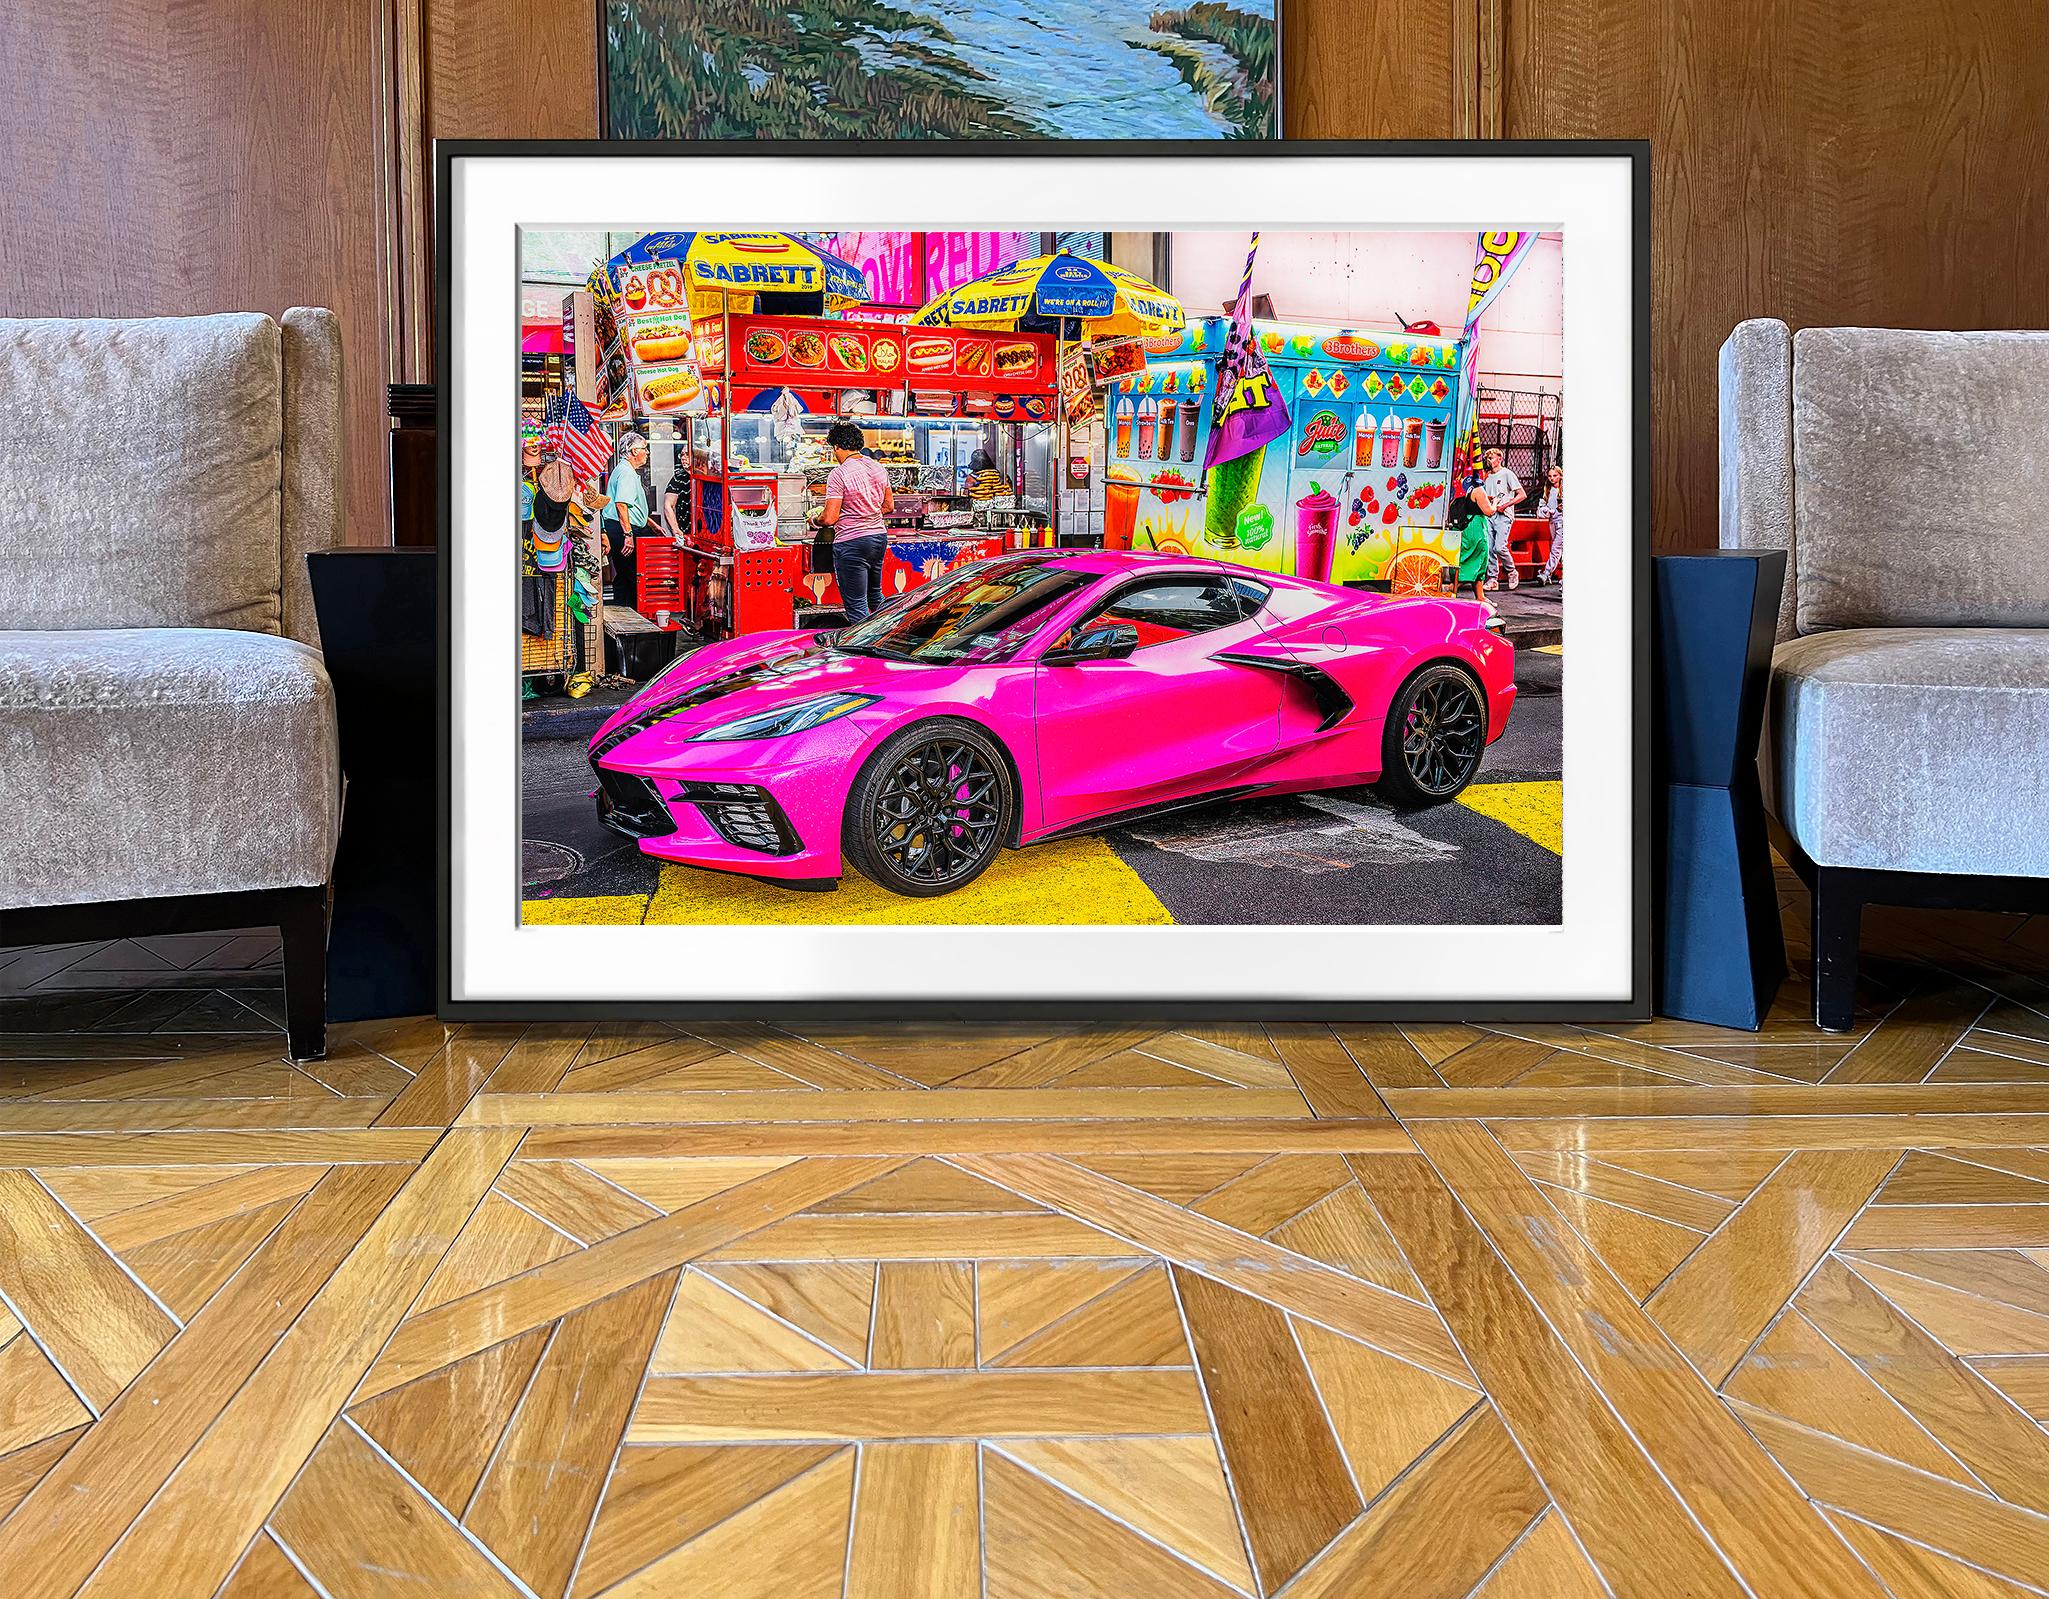 In the visual madness of Times Square,  a beacon of futuristic design and color in the form of a hot pink Corvette stops before a light.  The uncanny image was captured by veteran Street Photographer Mitchell Funk, who depicts the striking contrast